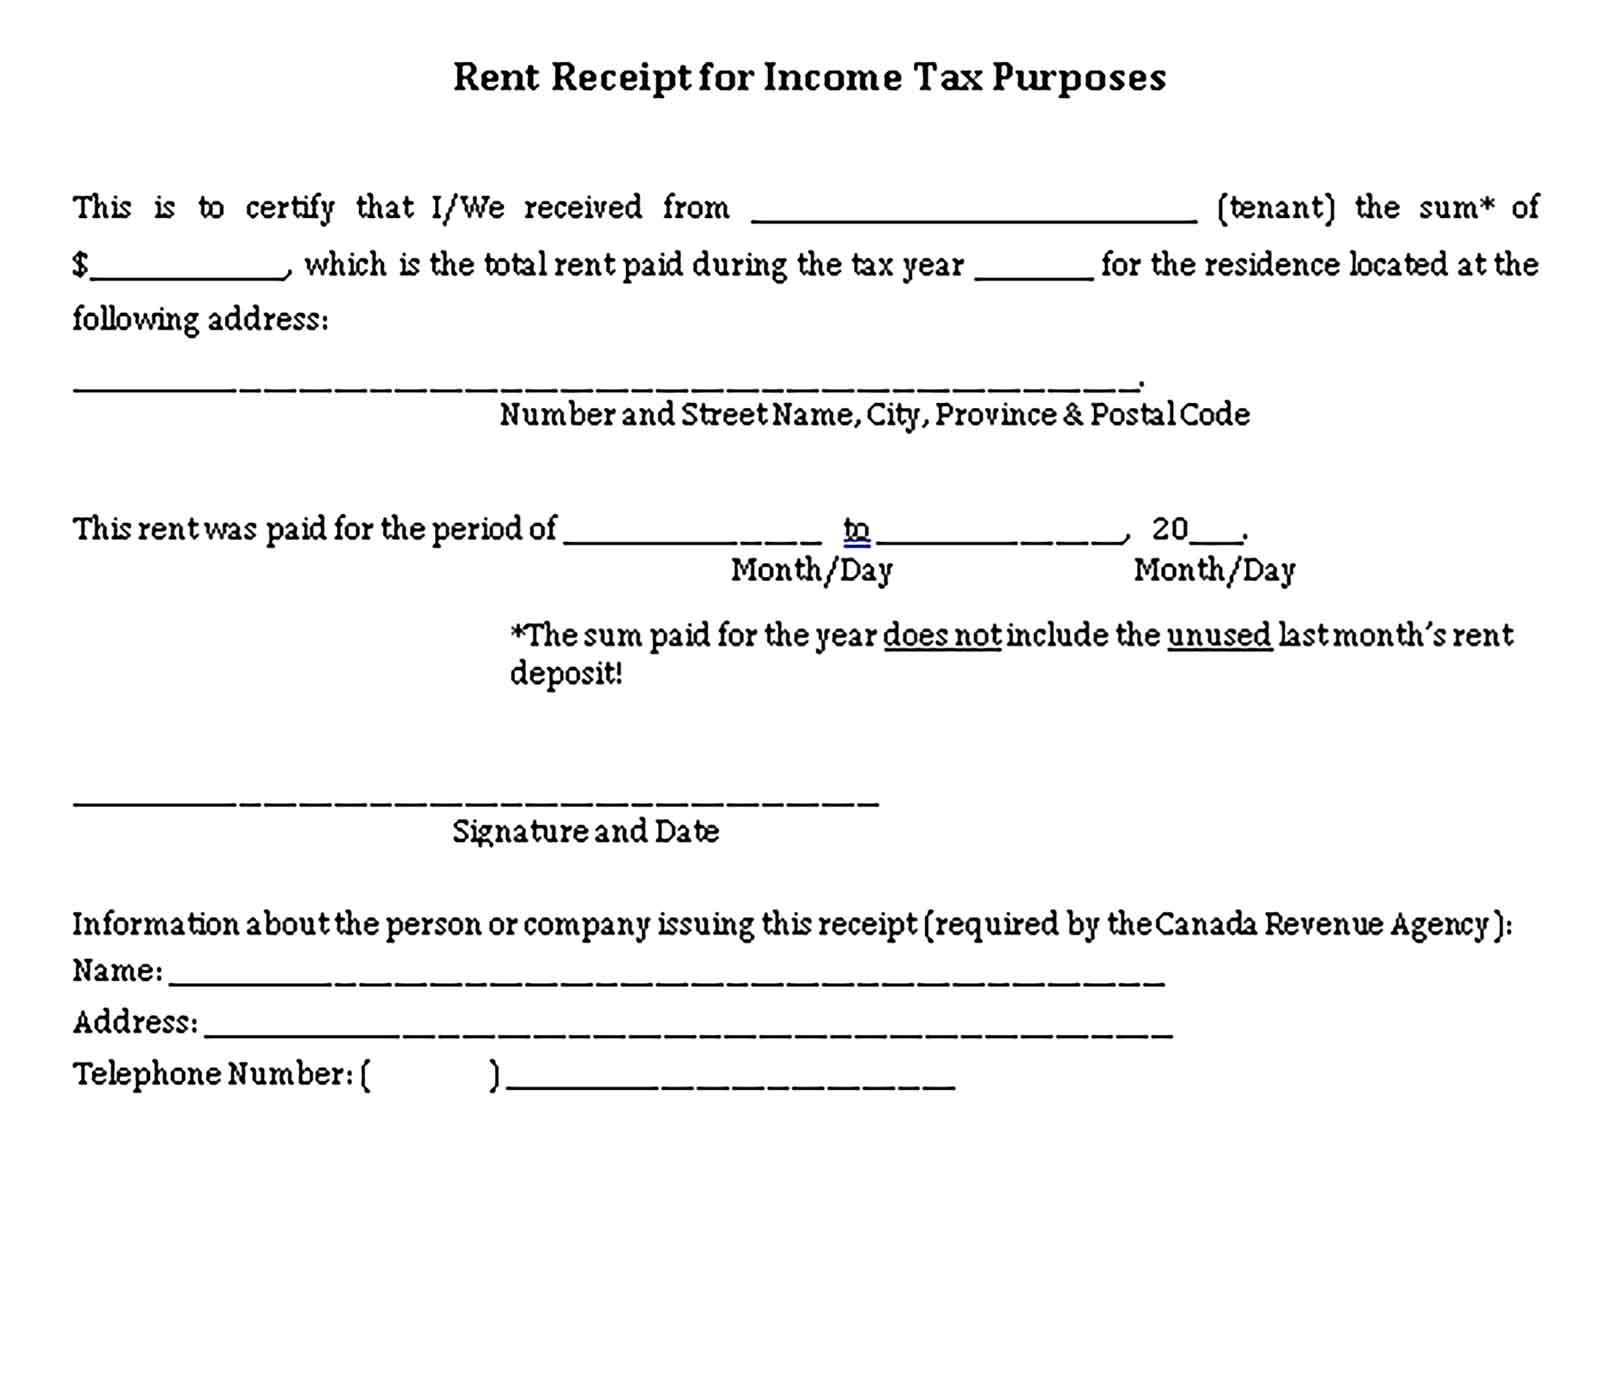 Sample Rent Receipt for Income Tax Purposes Templates 3